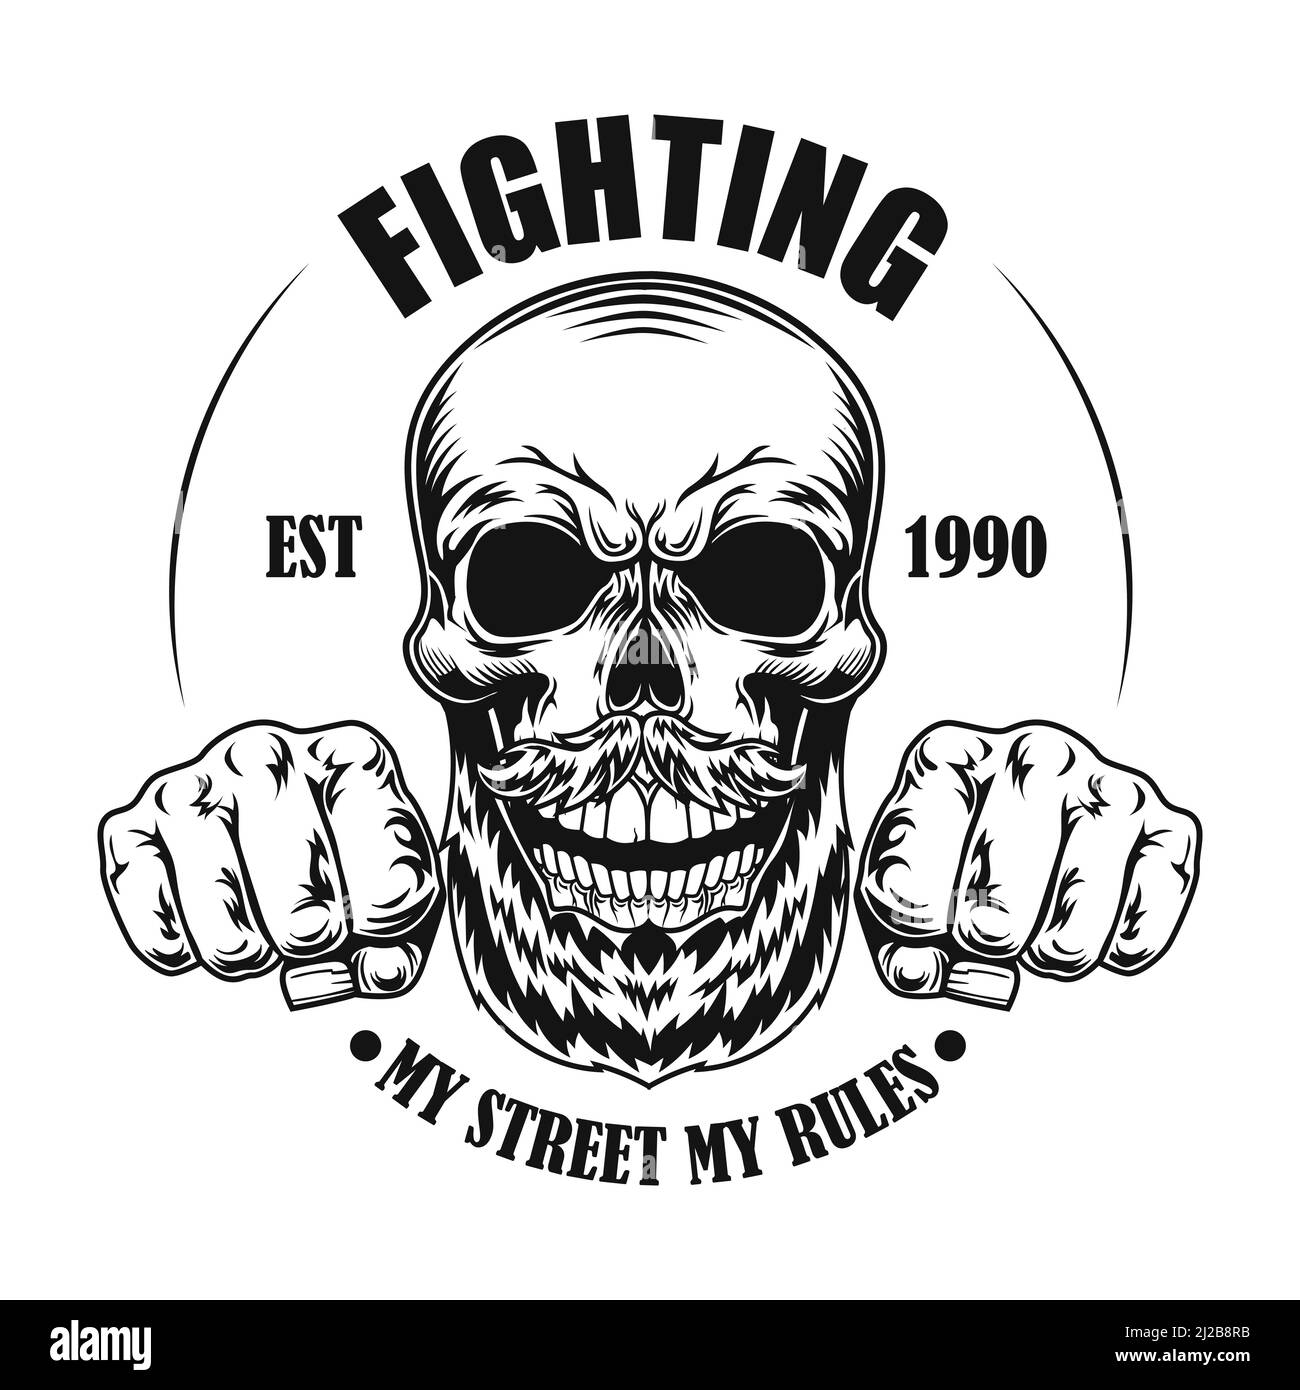 Skull of street fighter vector illustration. Head and fists of cartoon character with text. Lifestyle concept for fight club emblem or gangsta tattoo Stock Vector